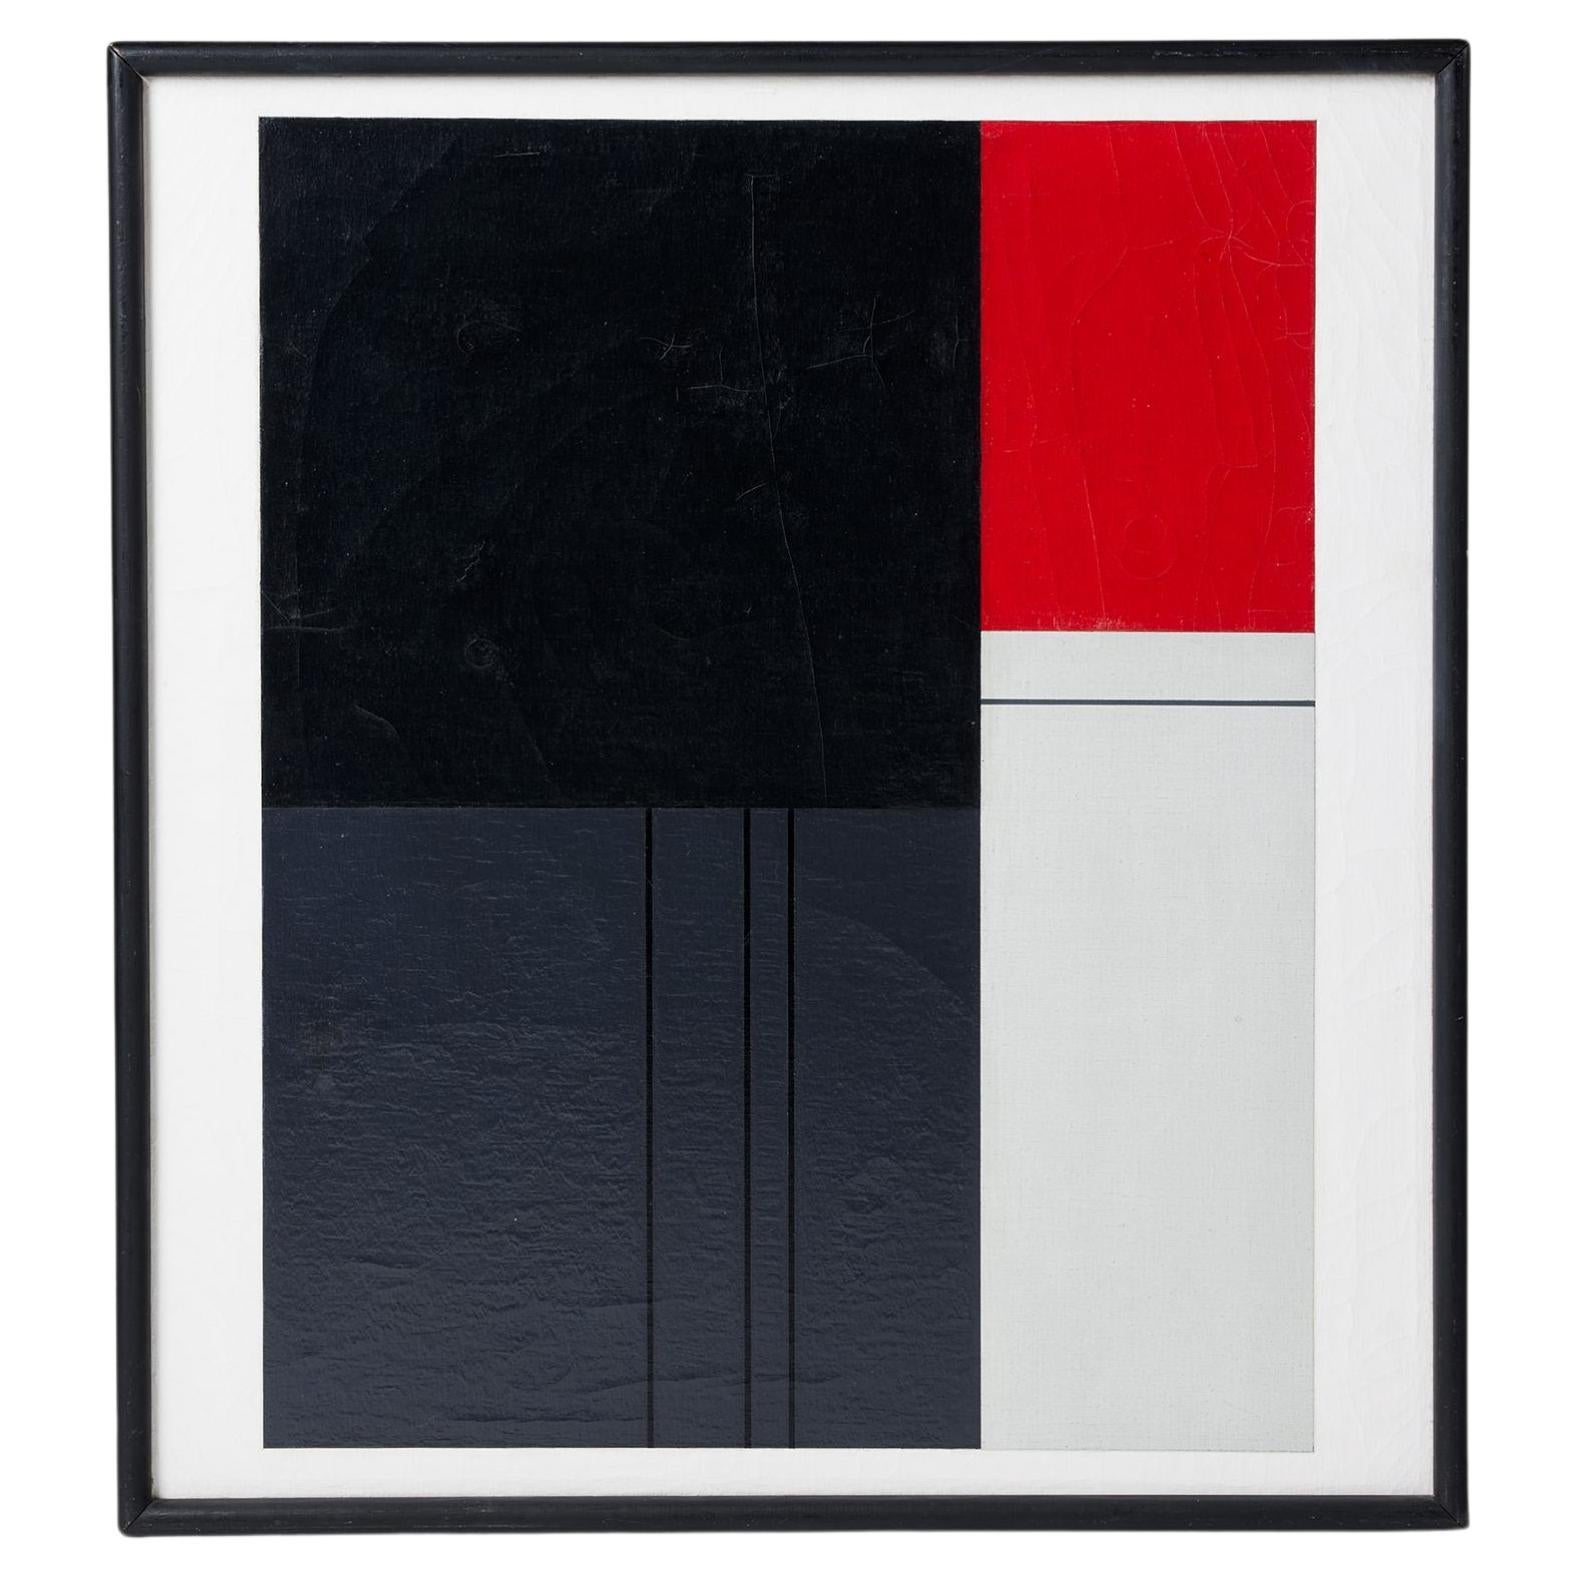 Painting ‘Untitled (Århus I)’ by Ole Schwalbe, Denmark, 1963, oil on canvas